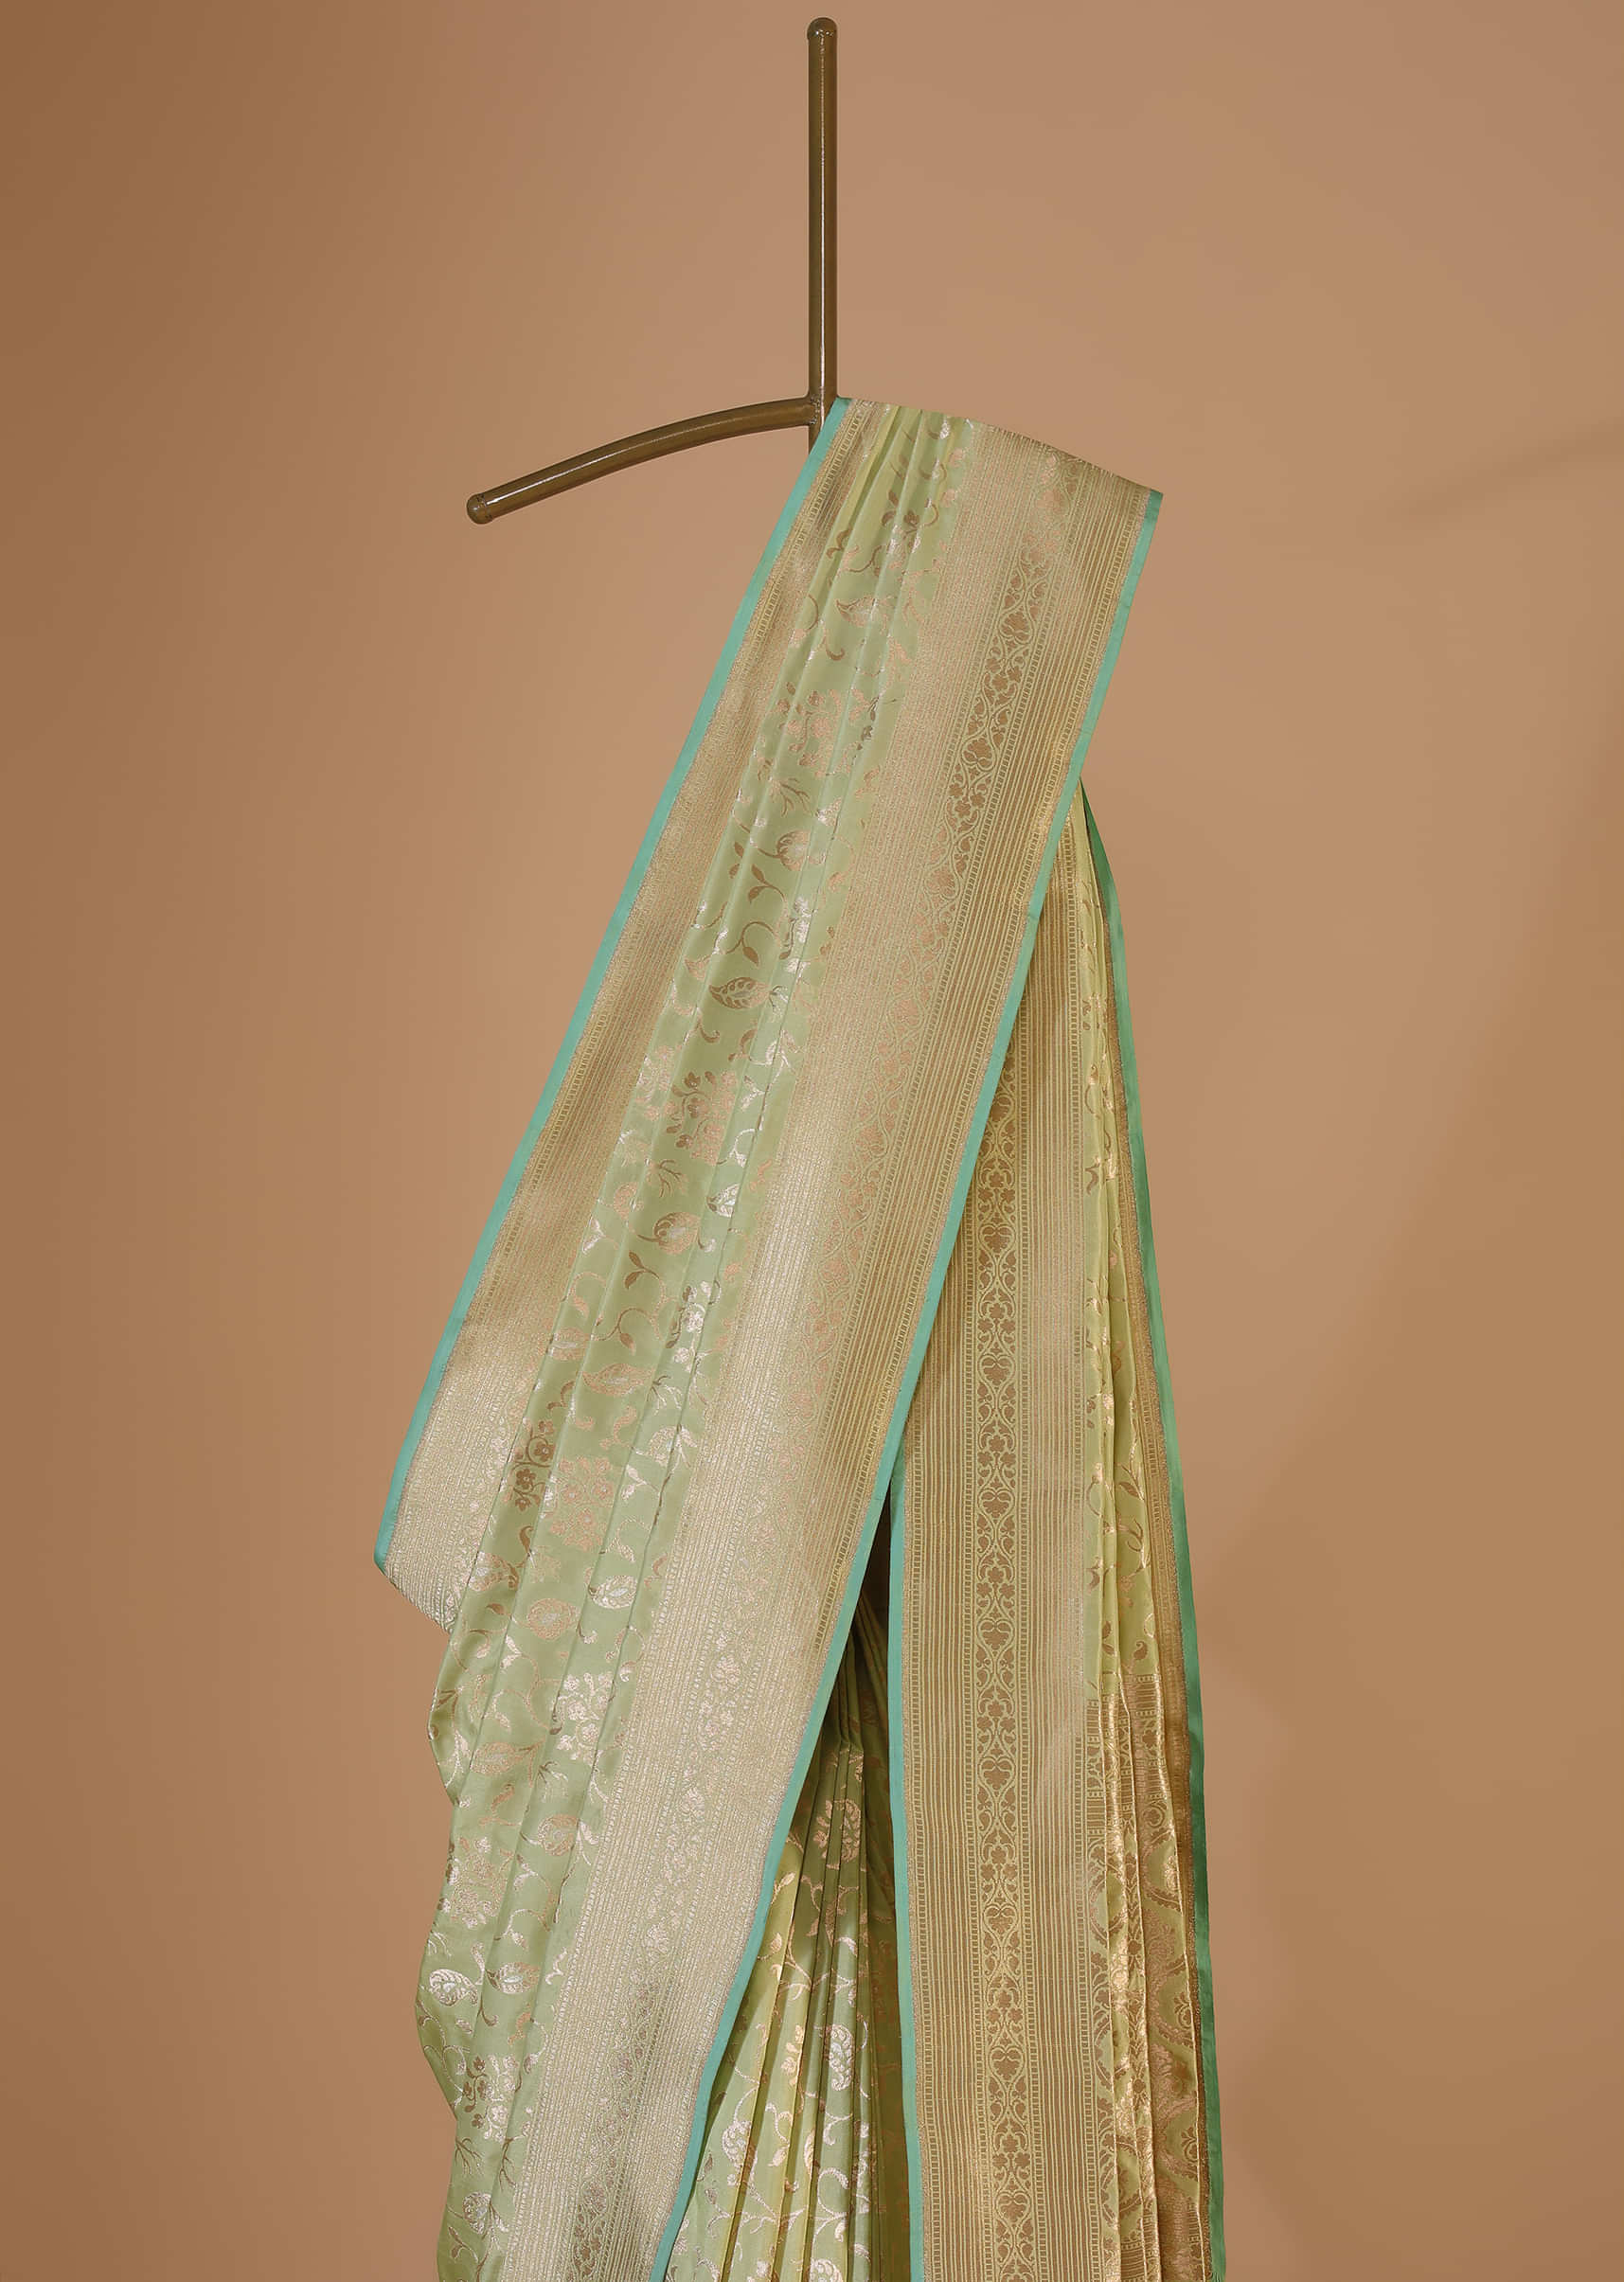 Green Handloom Banarasi Saree In Uppada Silk With Floral Jaal Weave And Unstitched Blouse